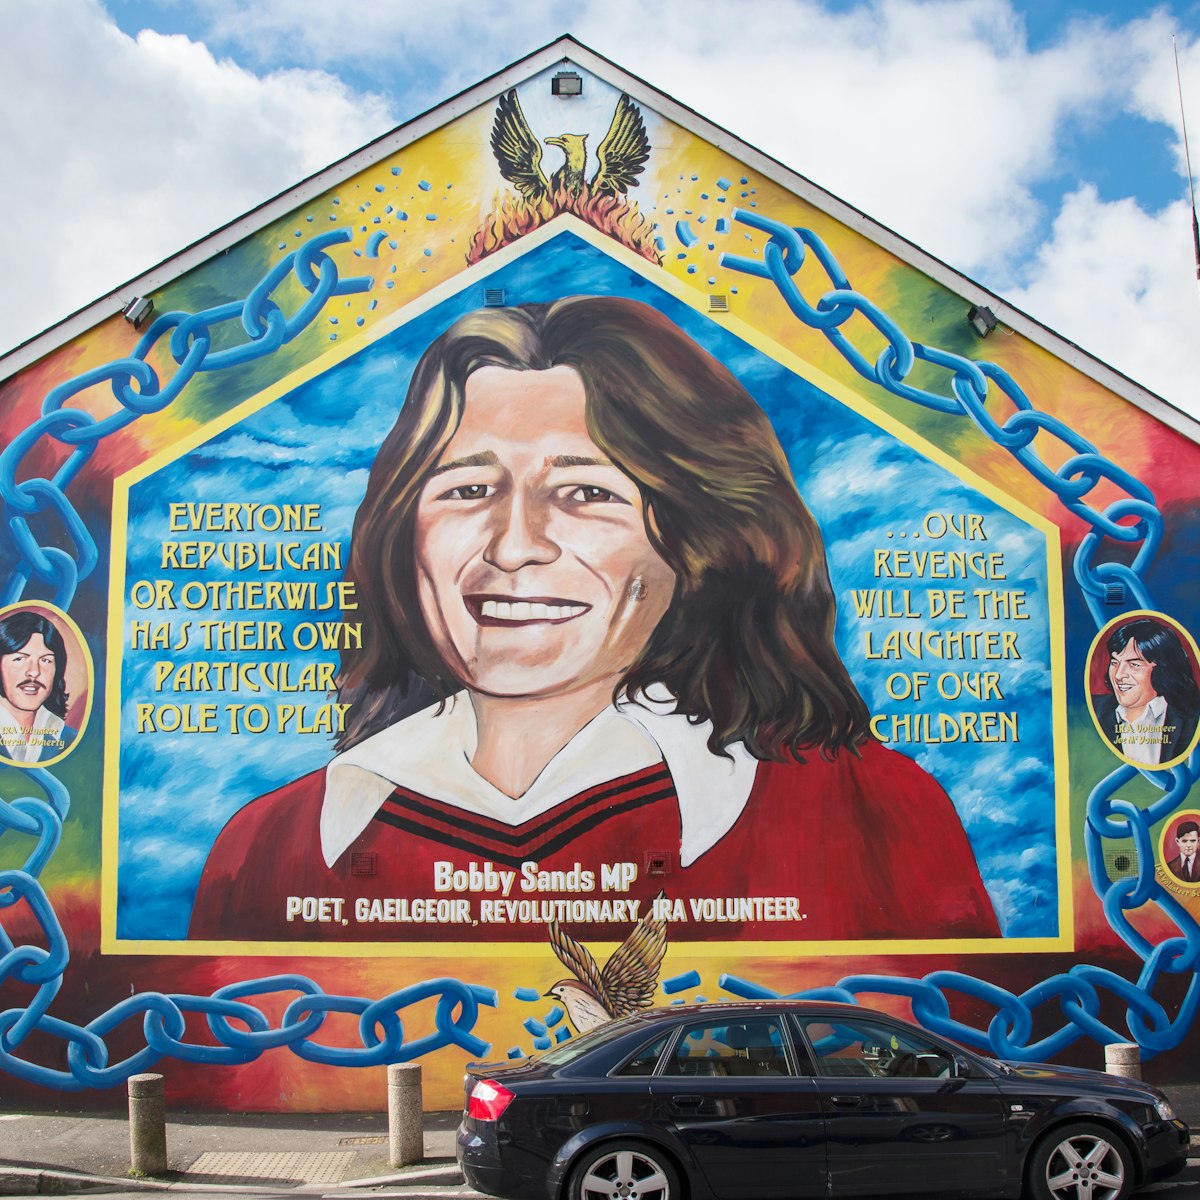 BELFAST, UK - 31 MAR 2016: Republican Mural featuring Bobby Sands on the Falls Road, Belfast.